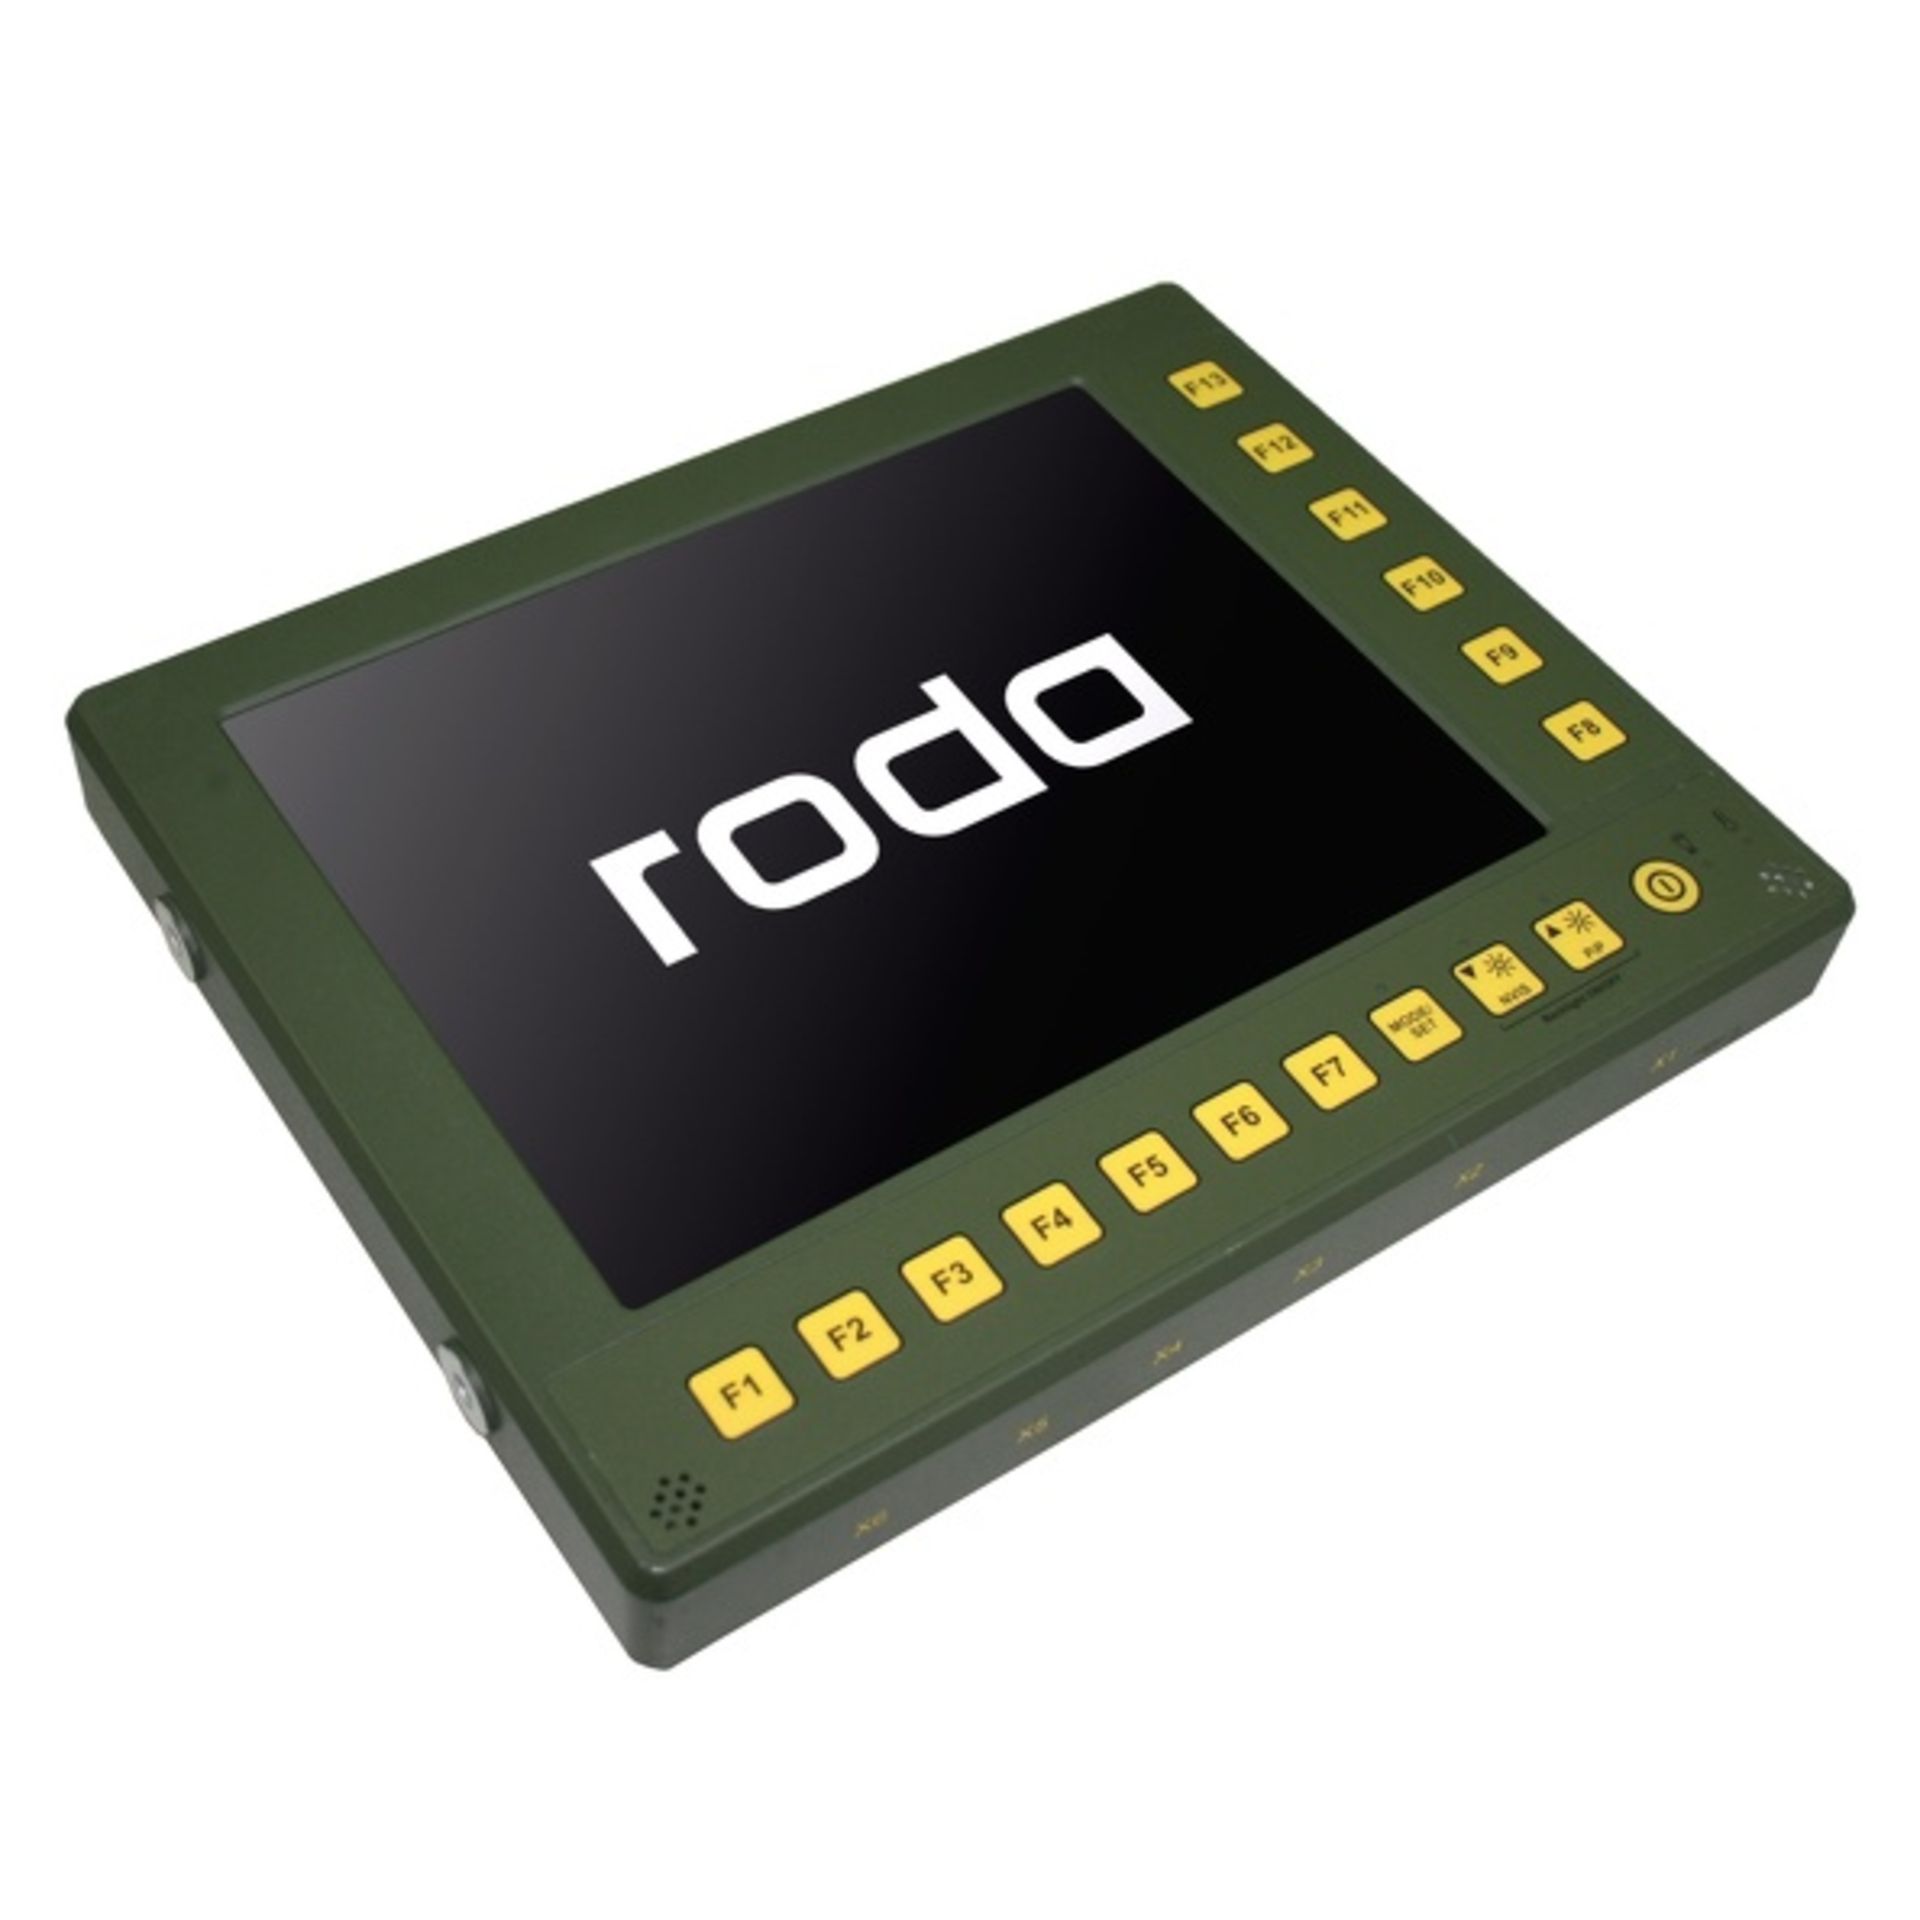 Roda mildef driver download for windows x64